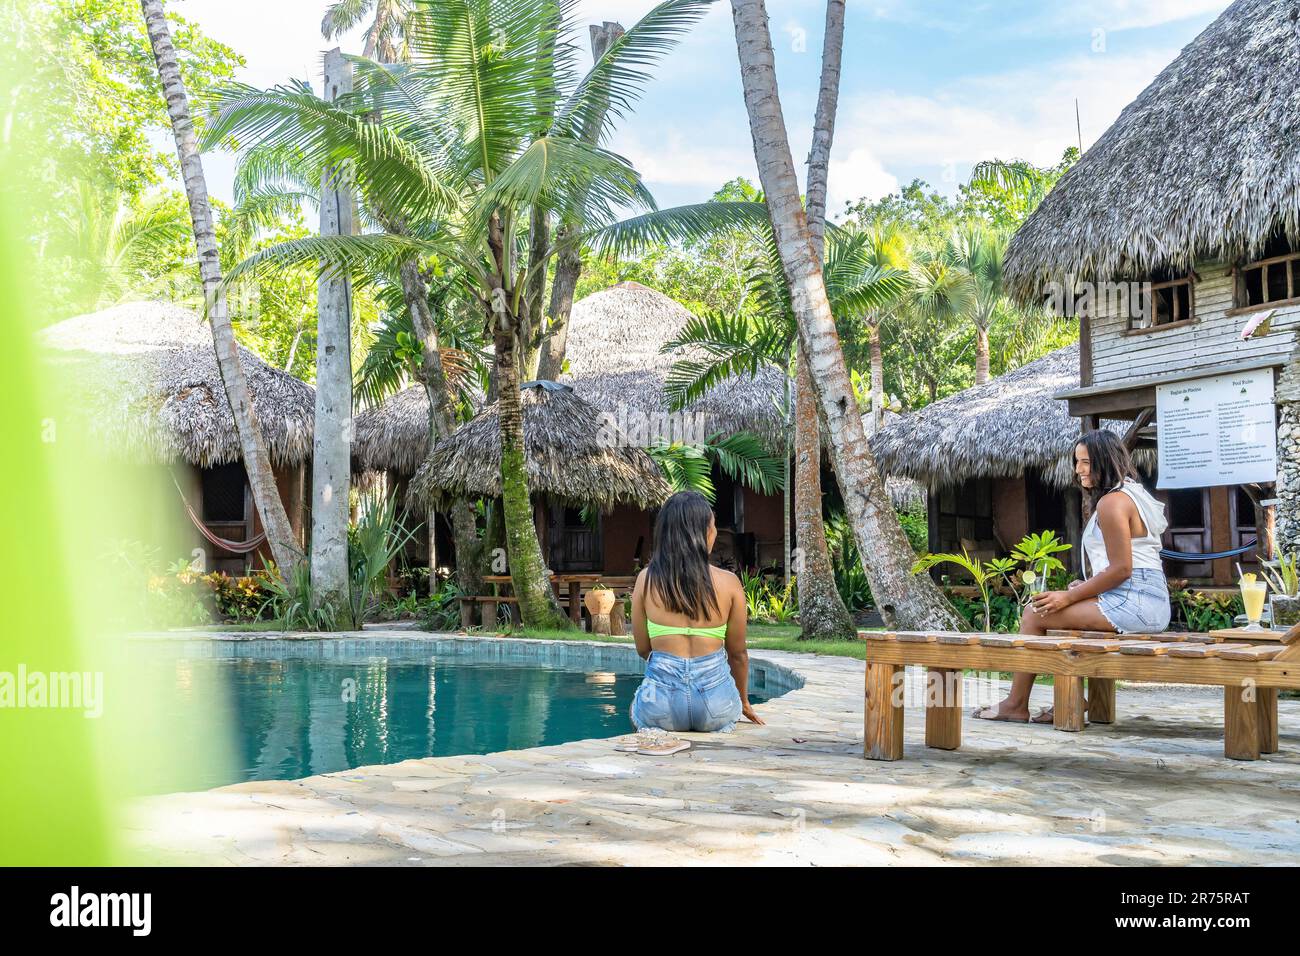 North America, Caribbean, Greater Antilles, Hispaniola Island, Dominican Republic, North Coast, Puerto Plata Province, Cabarete, Two pretty women relaxing at the pool of the boutique hotel Natura Cabana Stock Photo